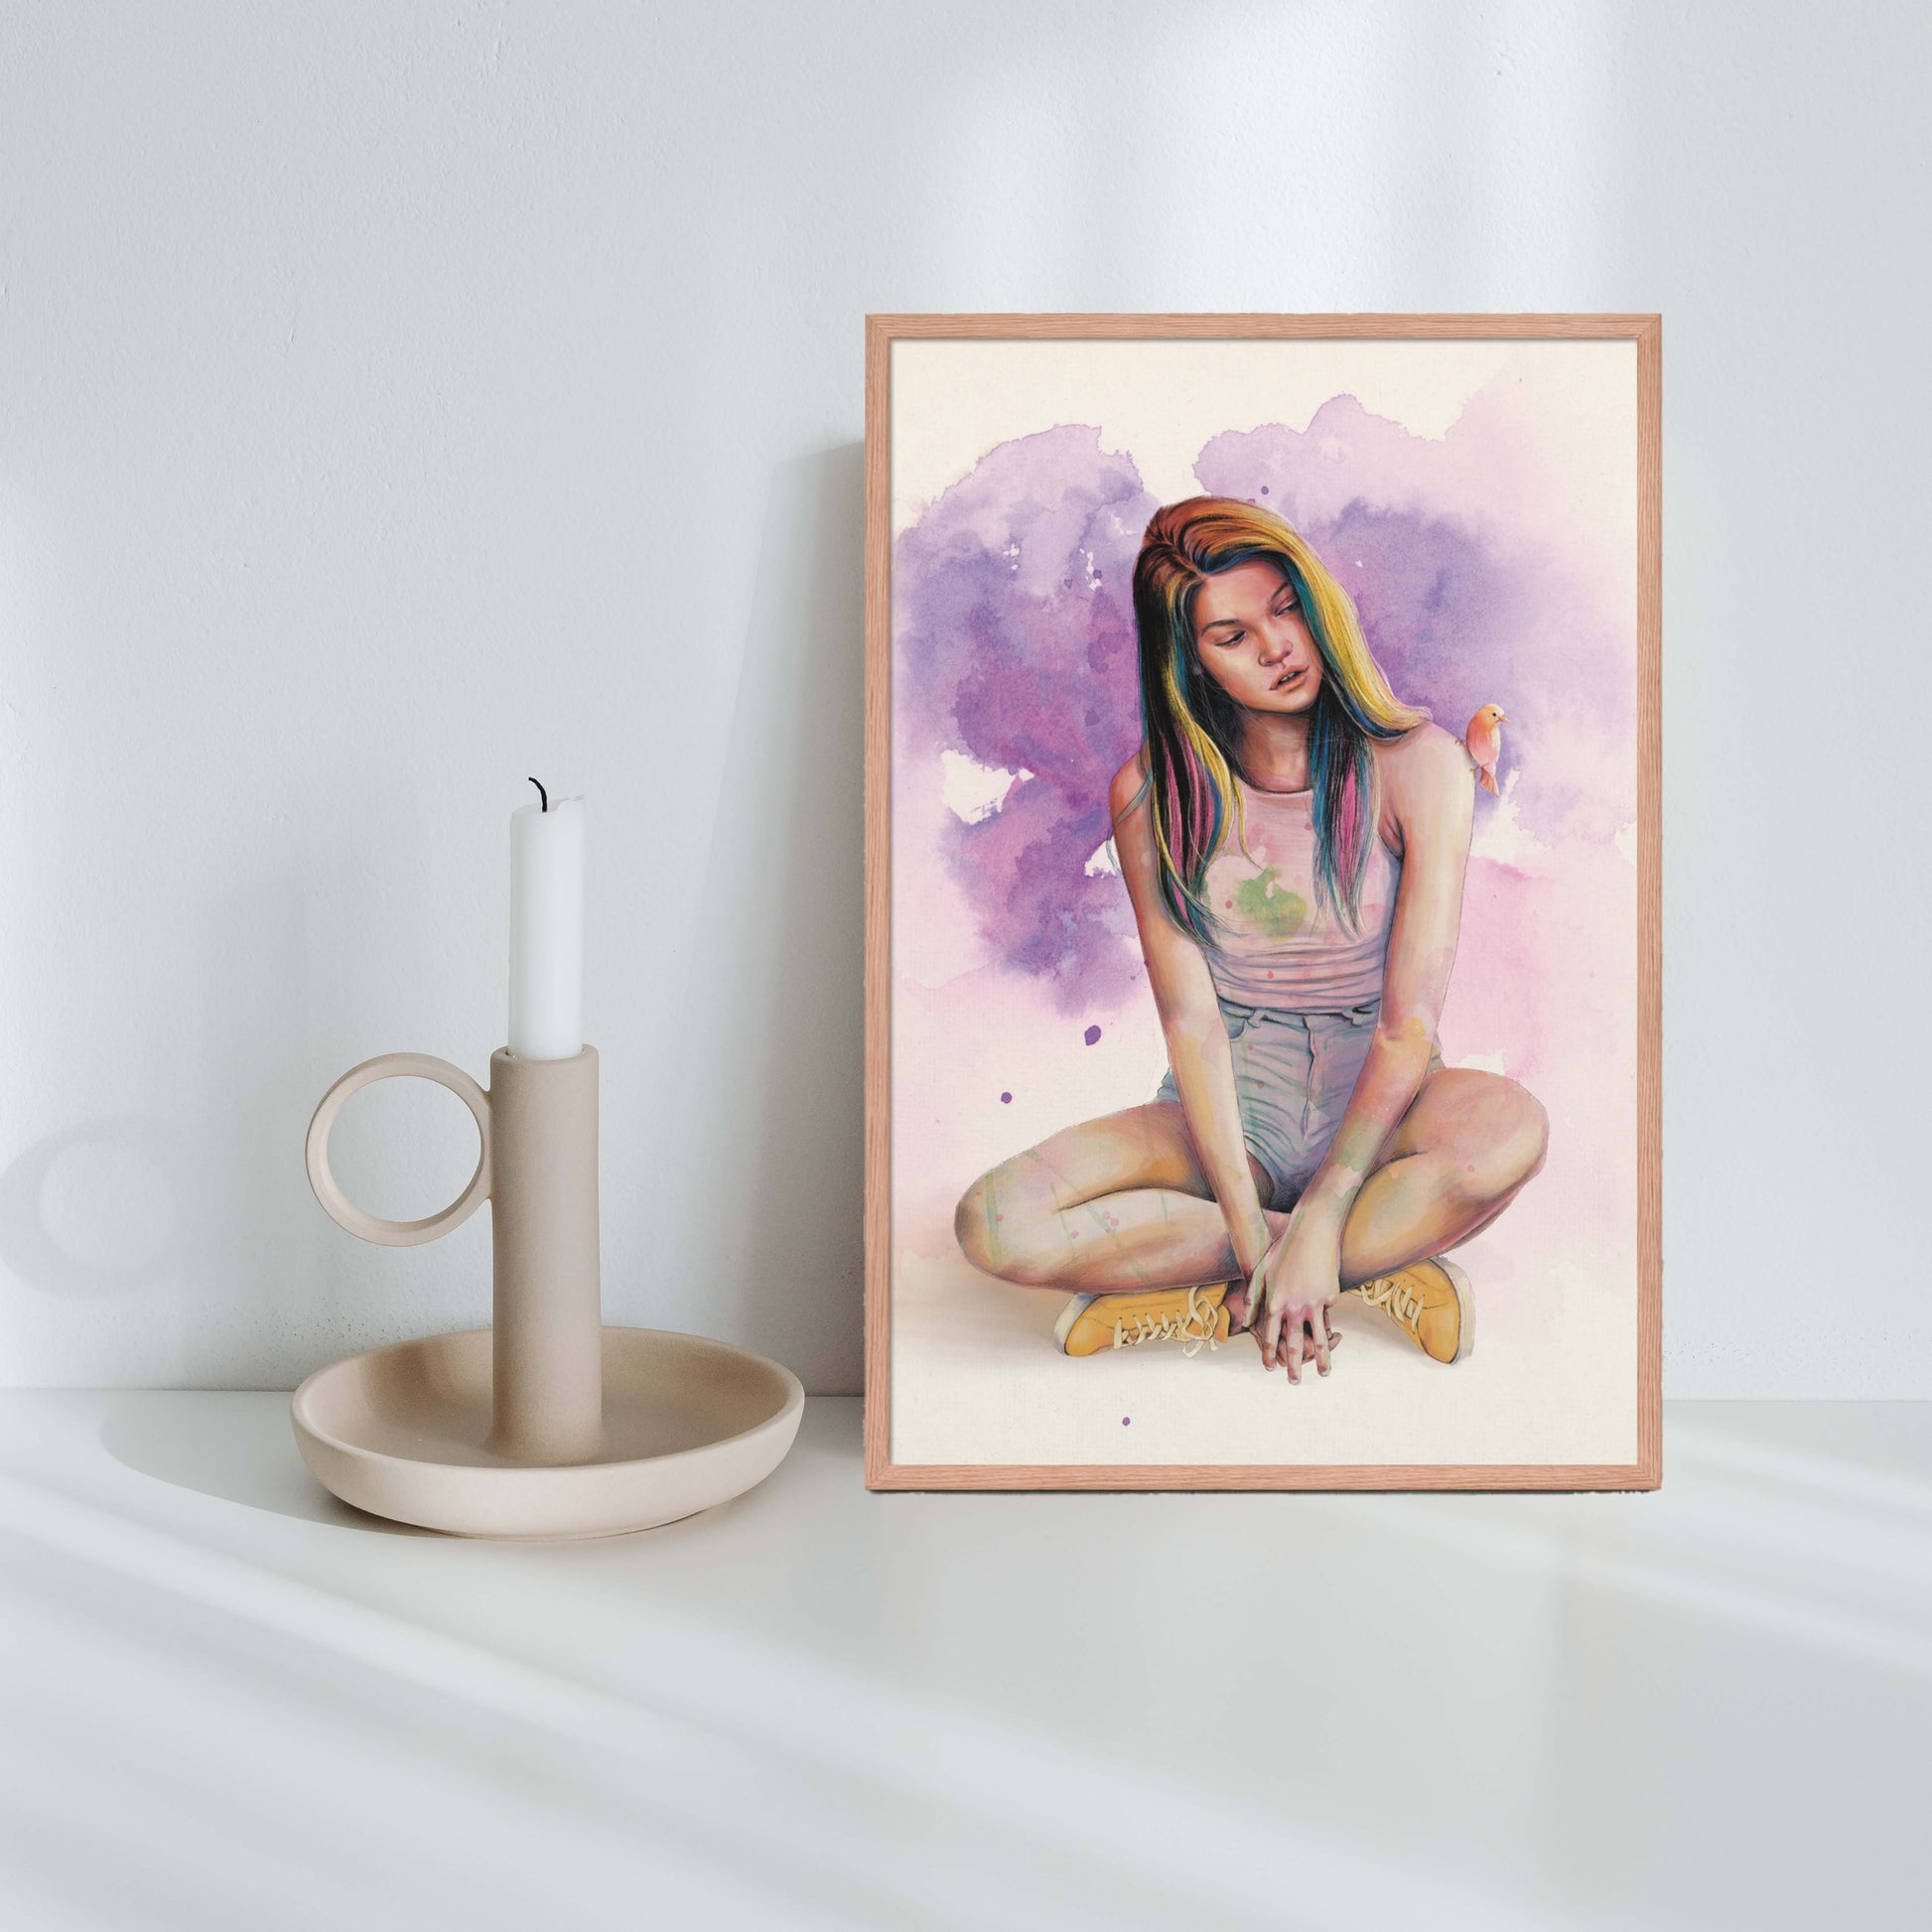 A girl in yellow shoes sitting idly with a bird sitting on her shoulder art poster in purple, pink & yellow hues oak framed poster